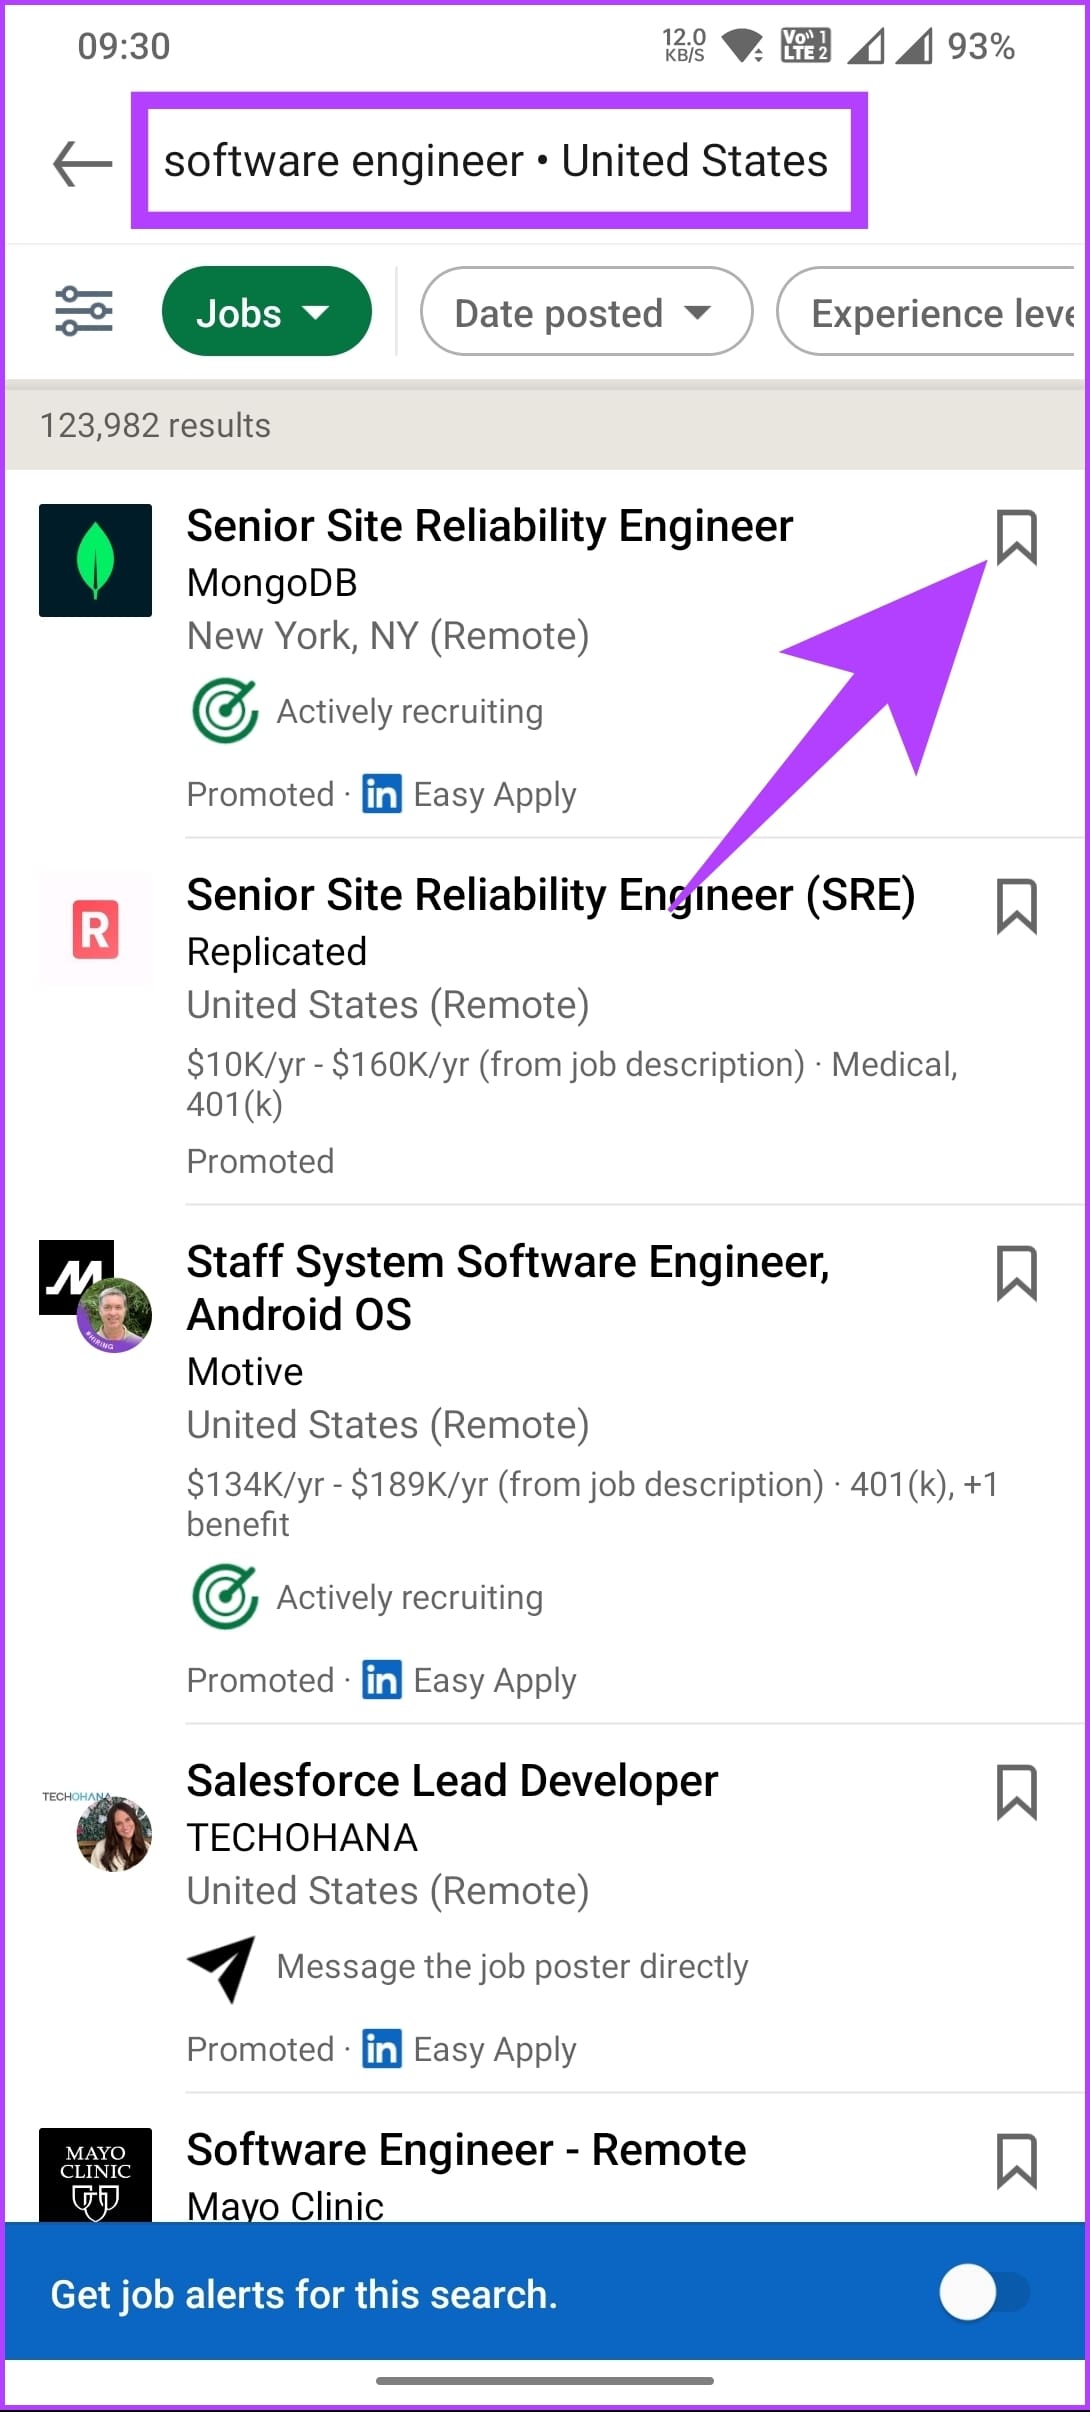 search for the job or choose